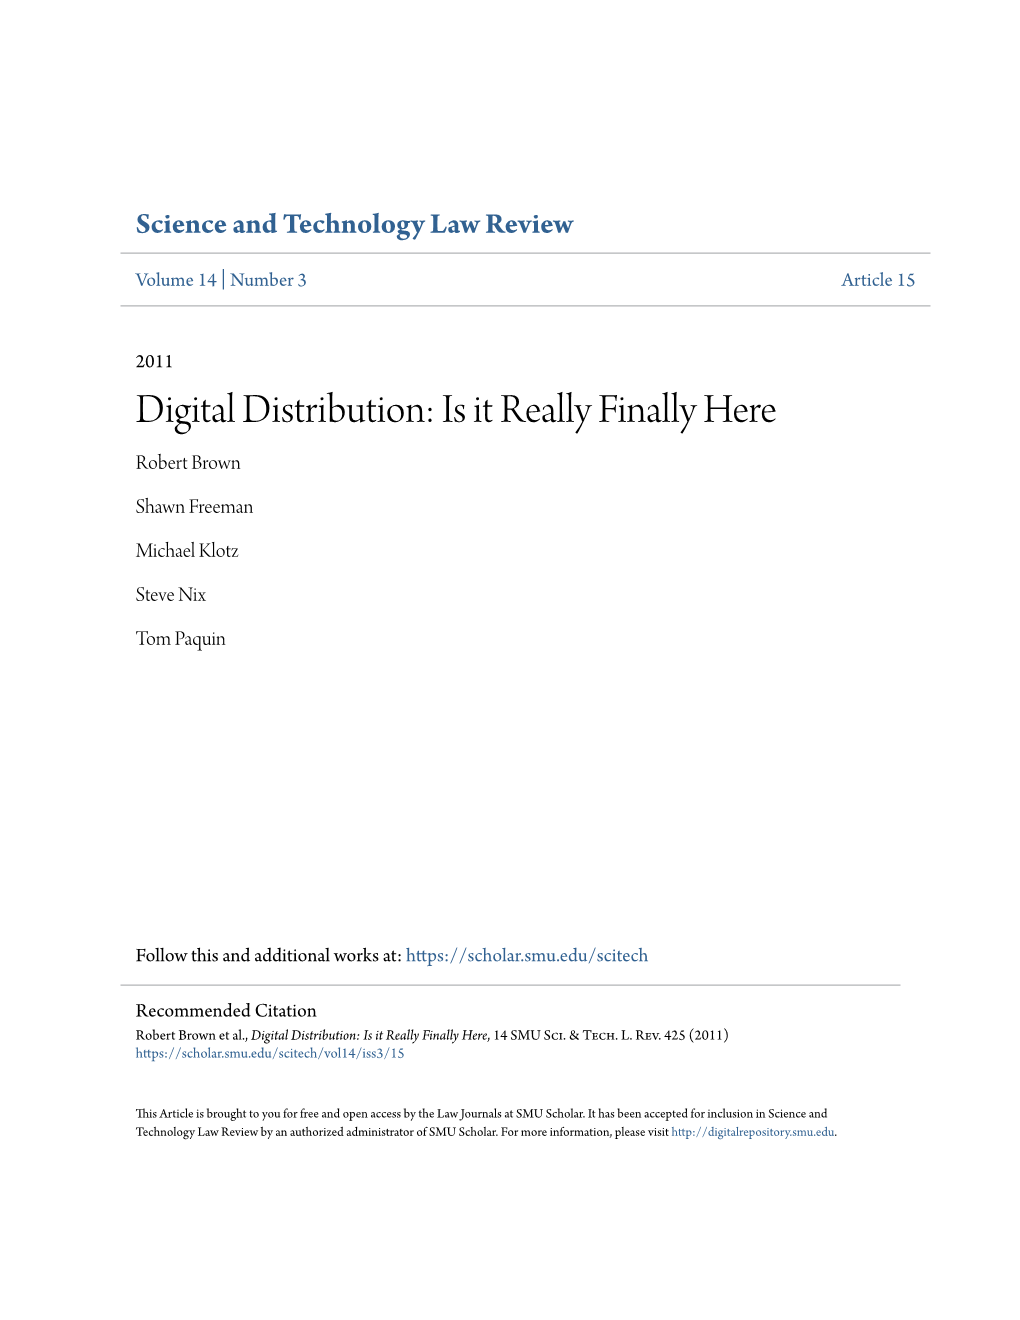 Digital Distribution: Is It Really Finally Here Robert Brown